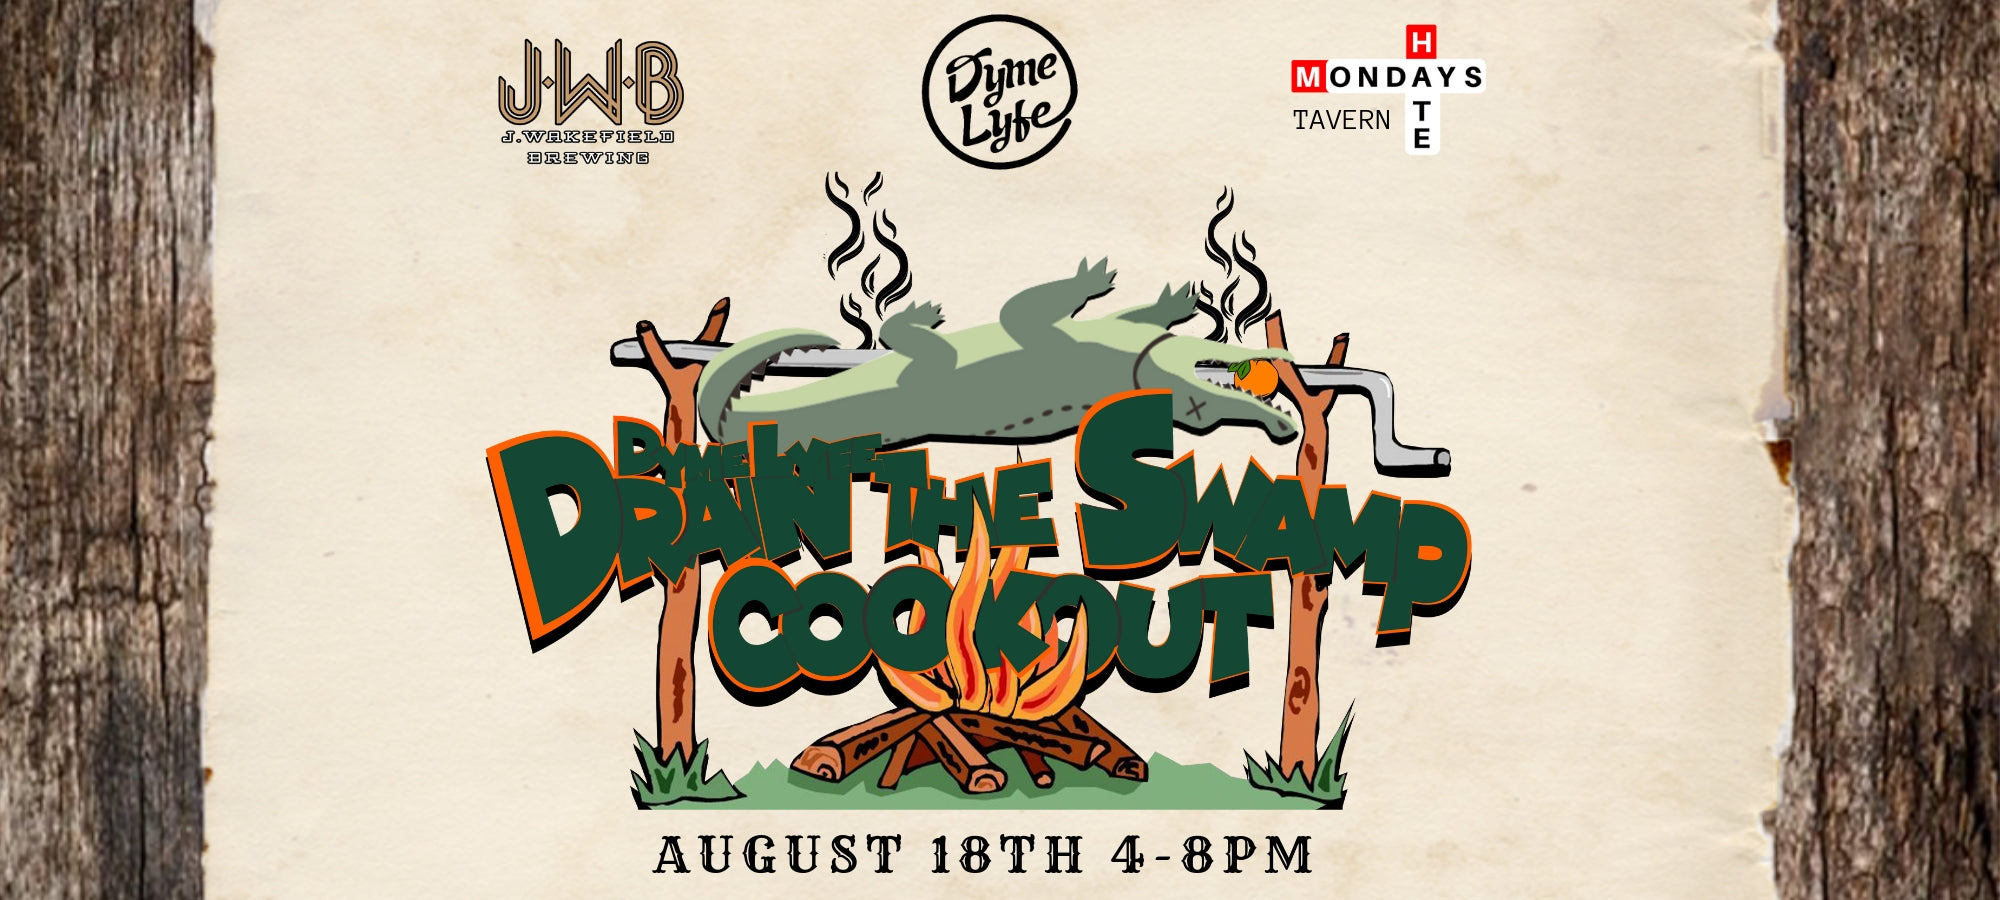 Tastes Like Chicken - Dyme Lyfe To Host Gator Cookout and Party Before The Camping World Kick-Off Game